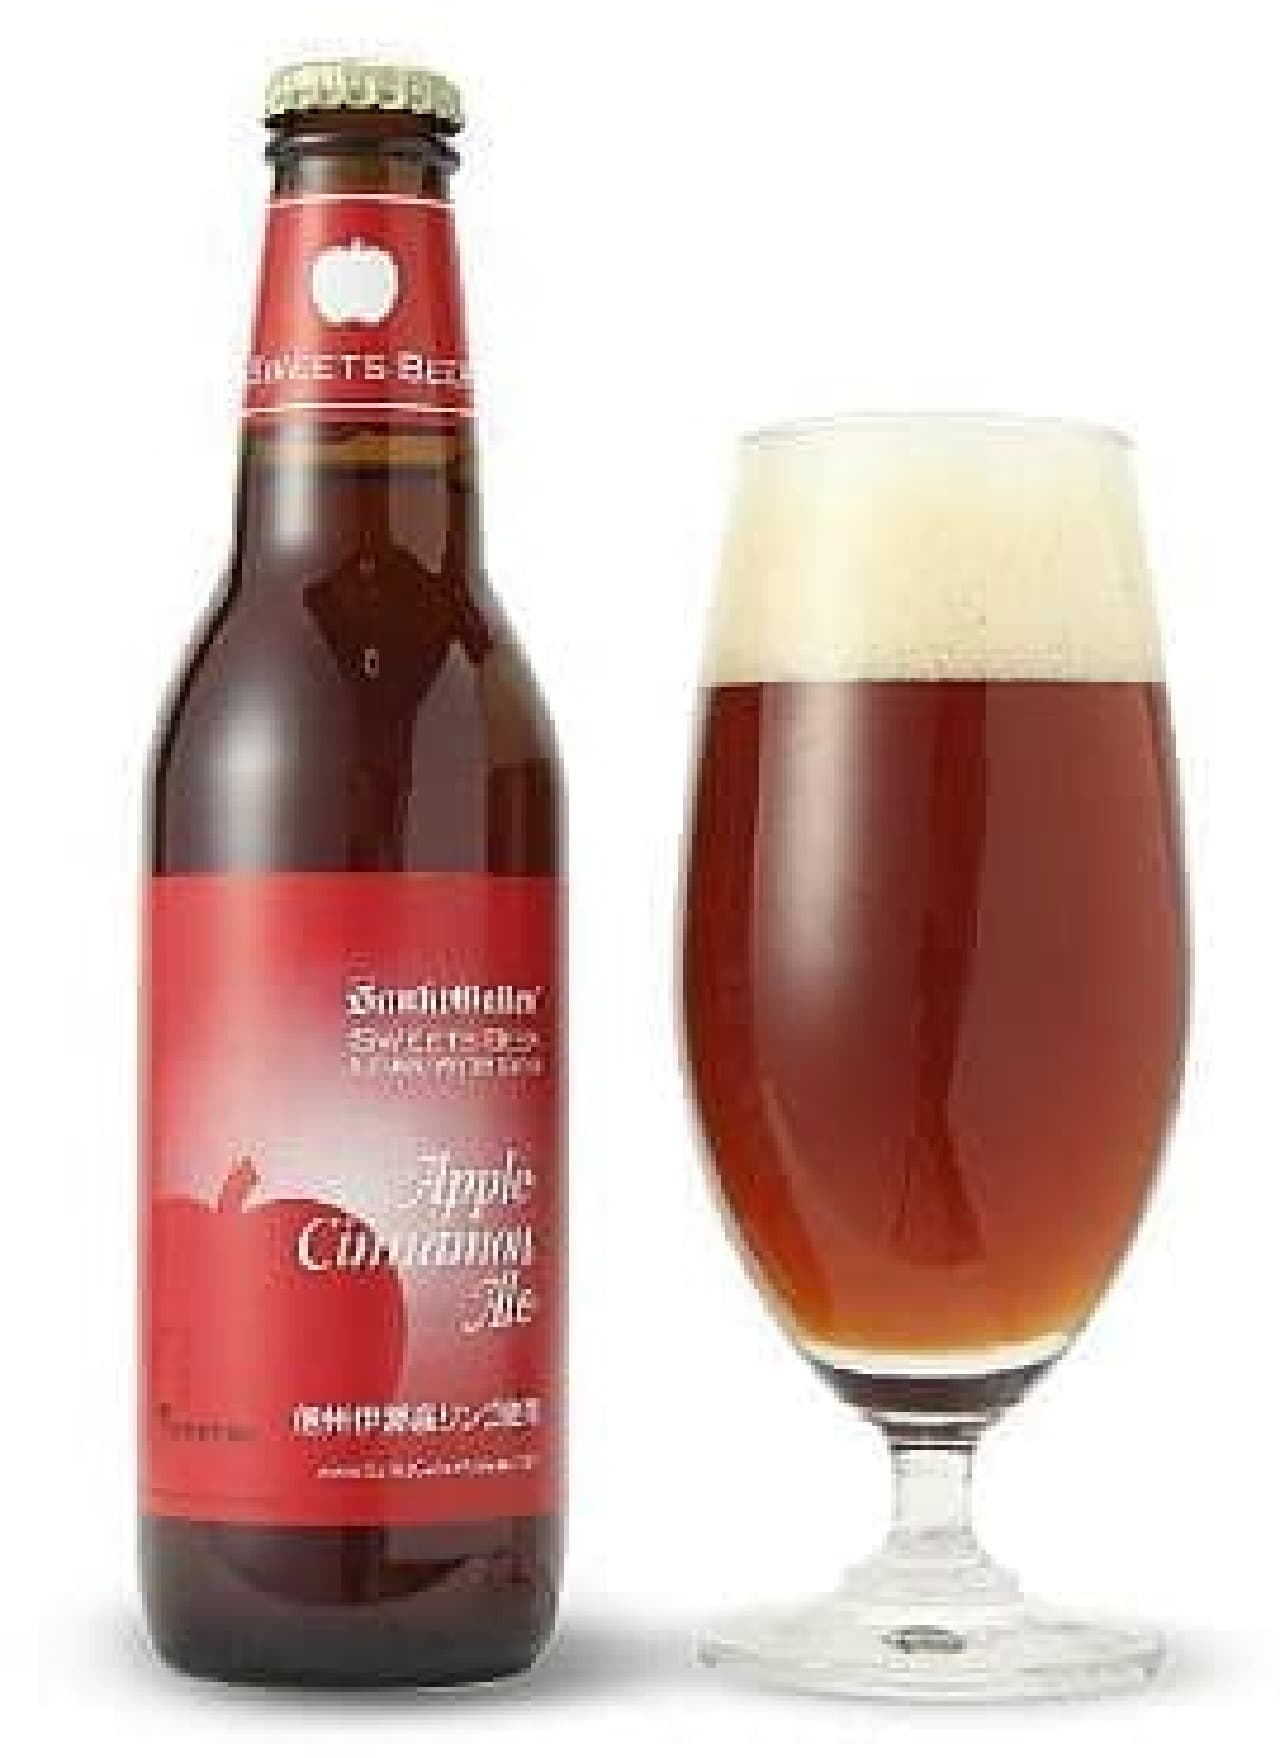 "Apple cinnamon ale" with baked apples will be released this year as well